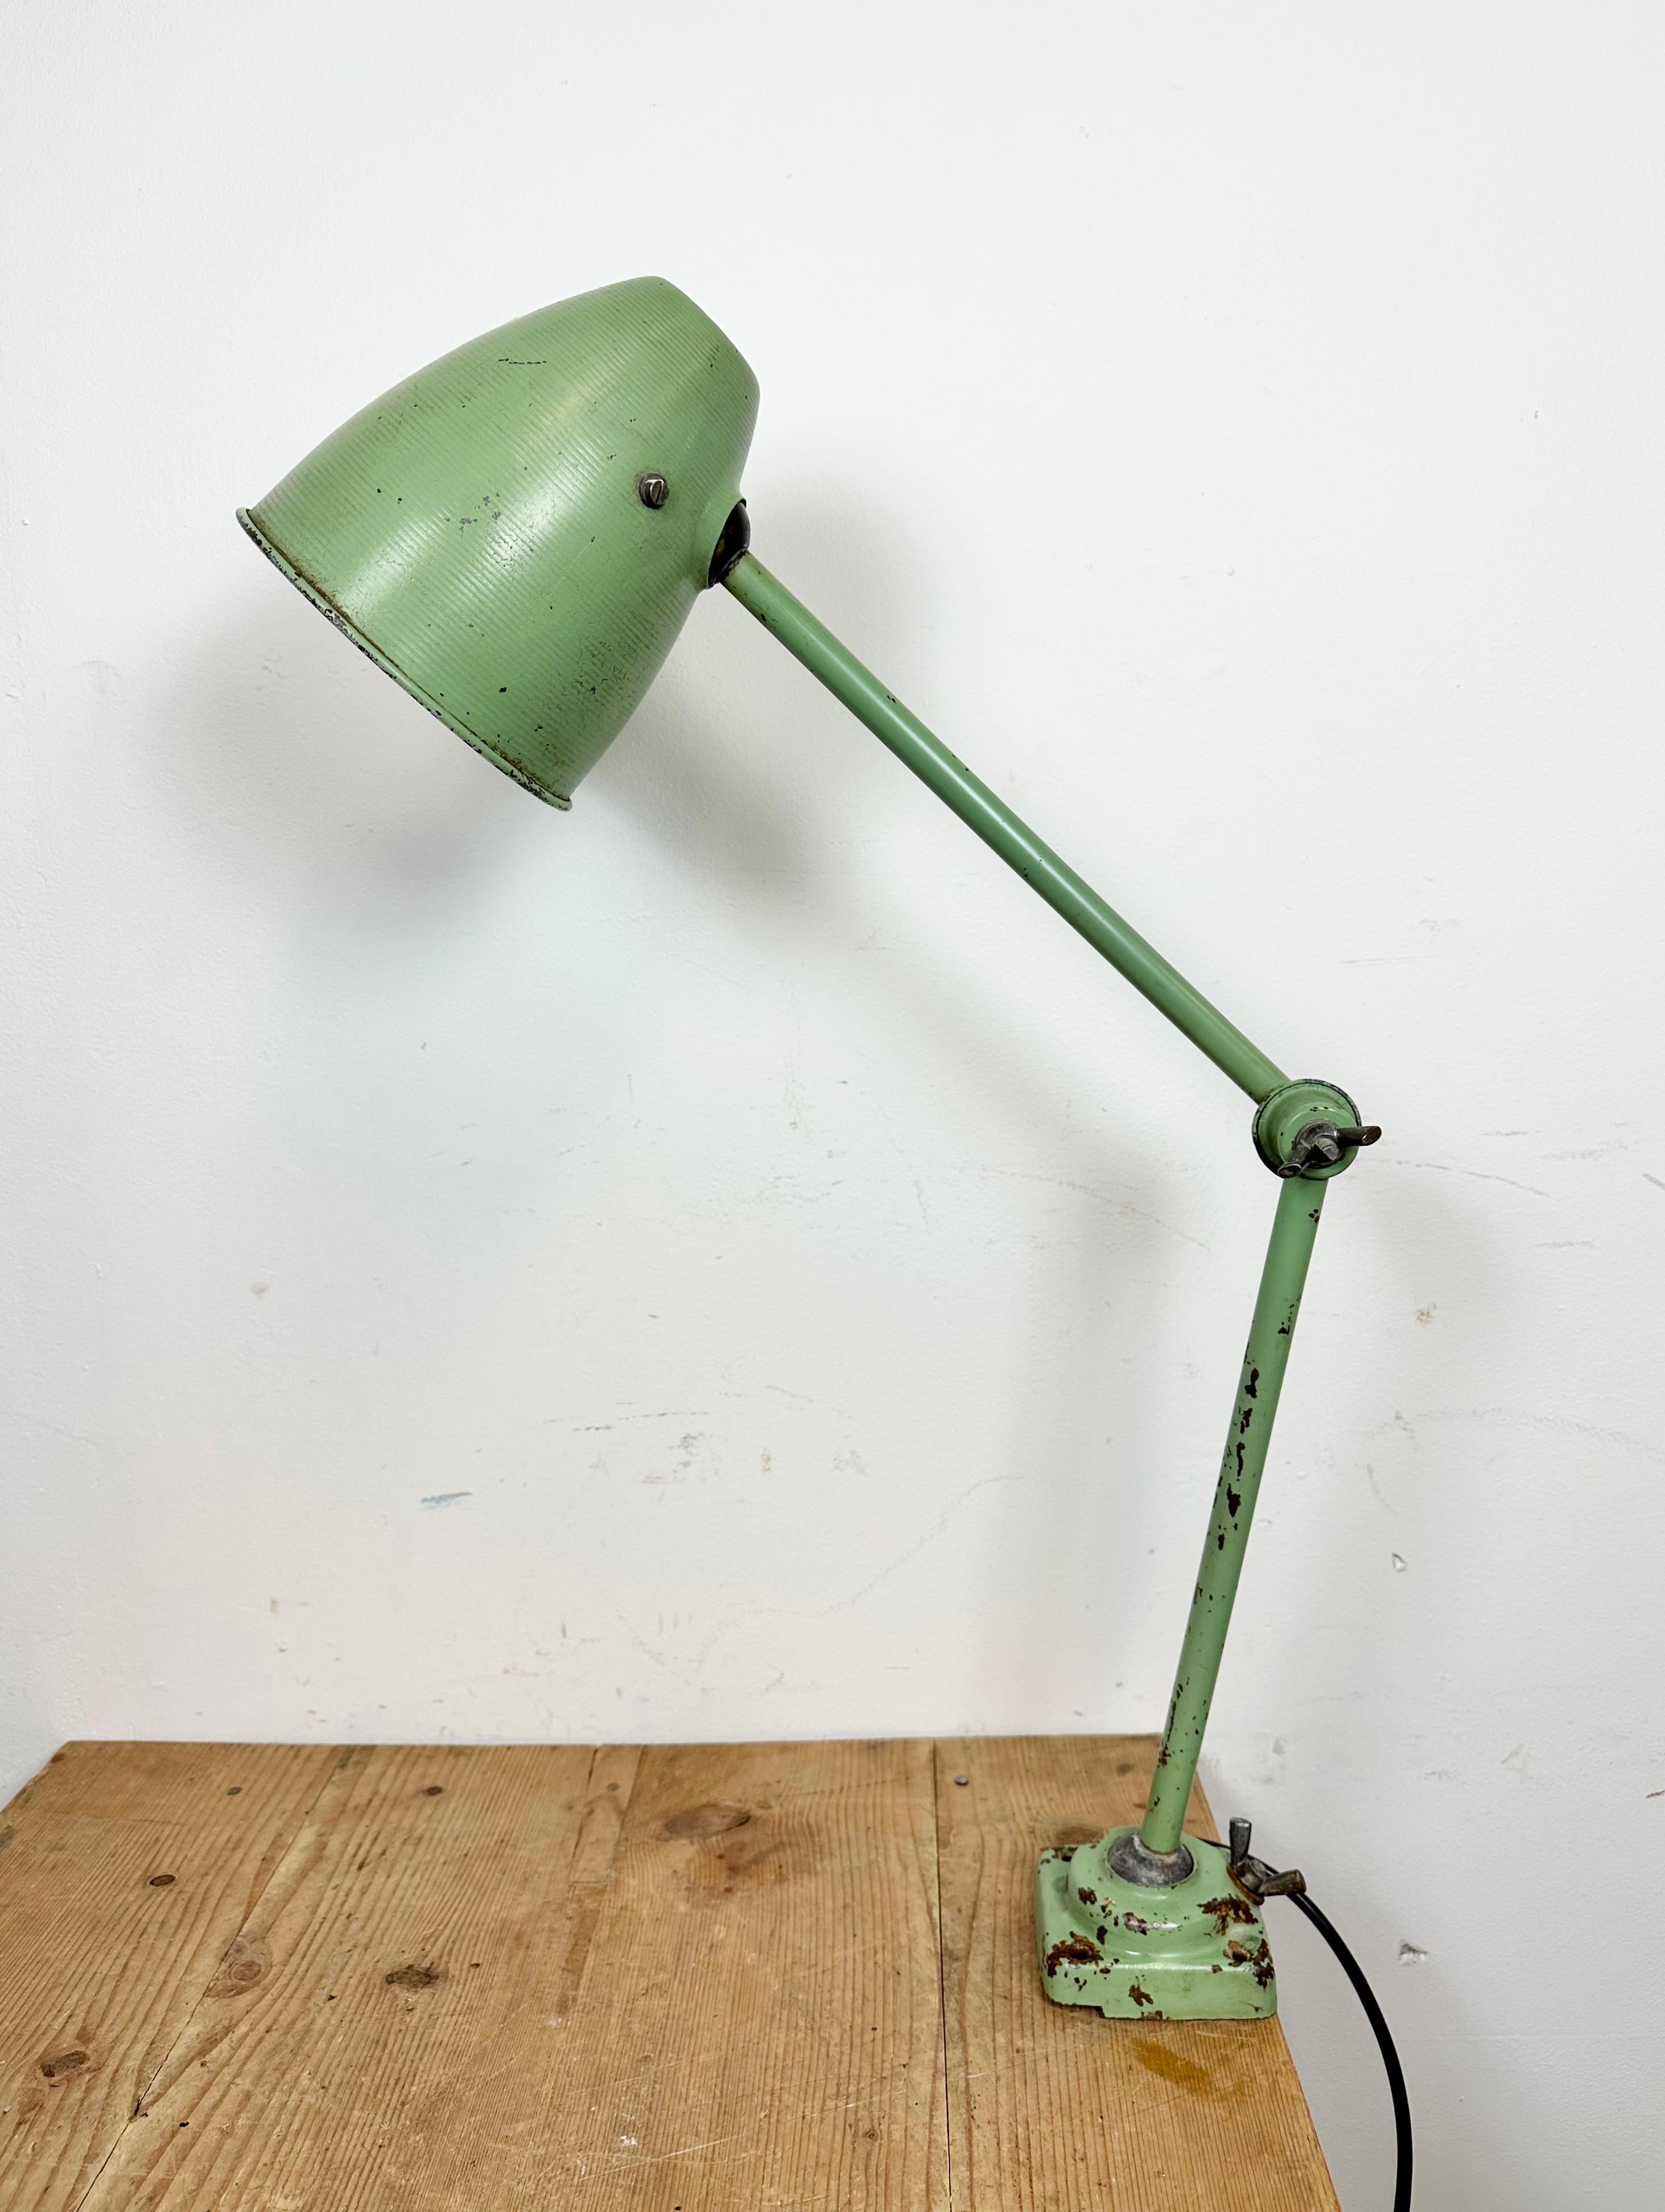 This green industrial desk lamp was made in former Czechoslovakia during the 1960s. It features an iron body with three adjustable joints. The porcelain socket reqiures E 27/ E26 light bulbs. New wire. The switch is situated directly on the shade.